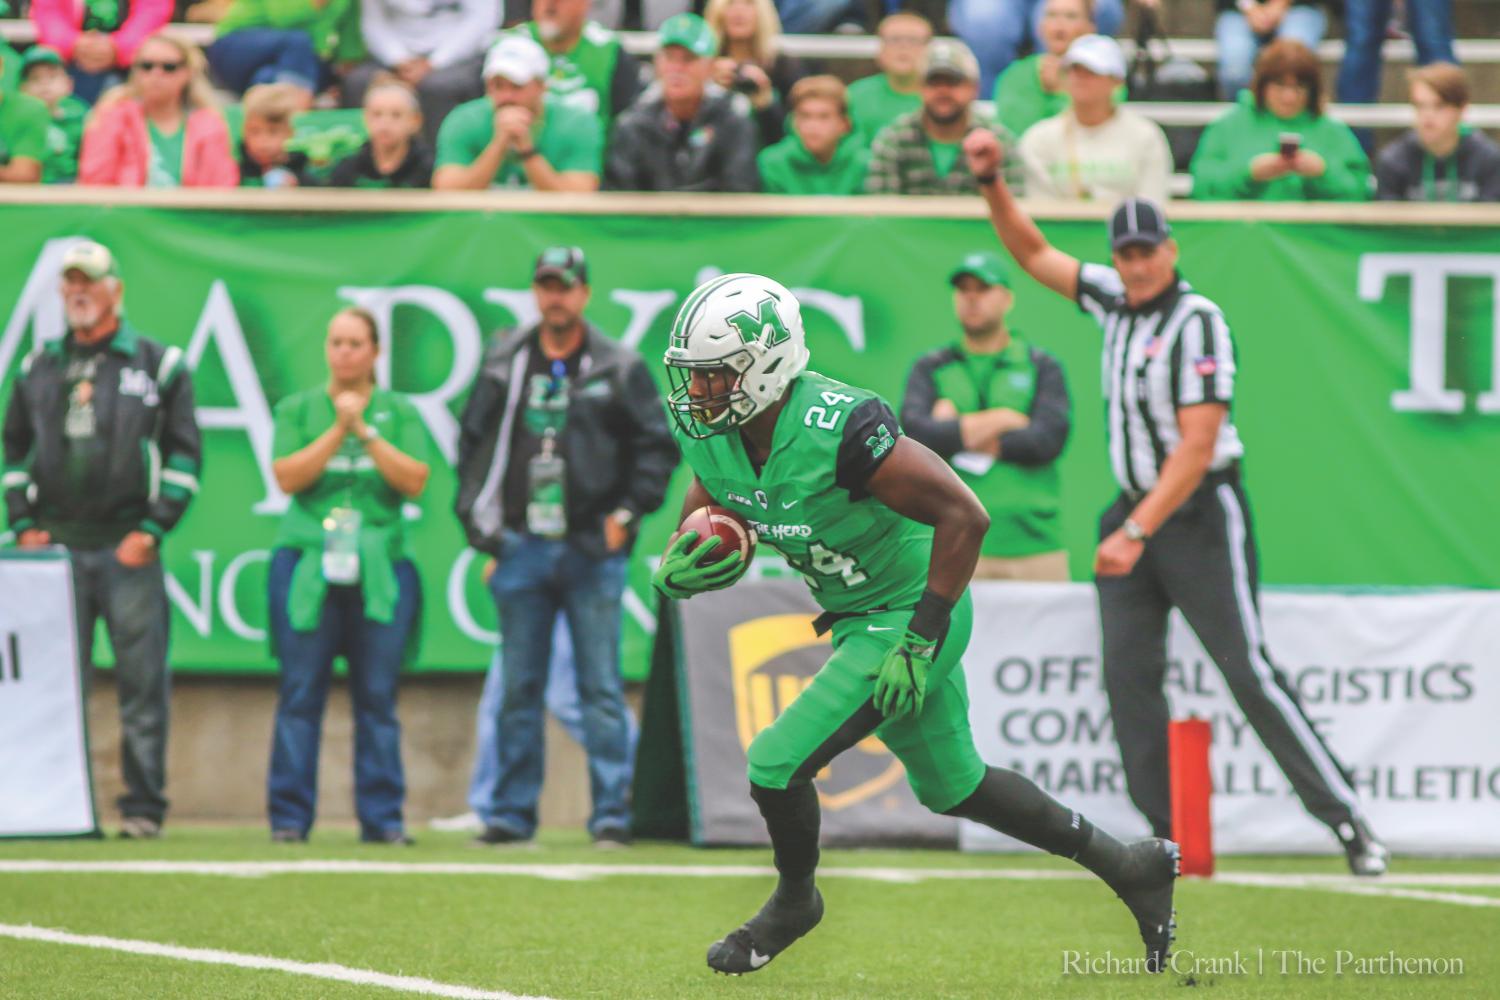 Keion Davis gets ready to return one of his two kick off return touchdowns against Miami (Ohio). Following his two kickoff return touchdowns and his 196 kickoff return yards, Davis was named Conference USA Special Teams Player of the Week.